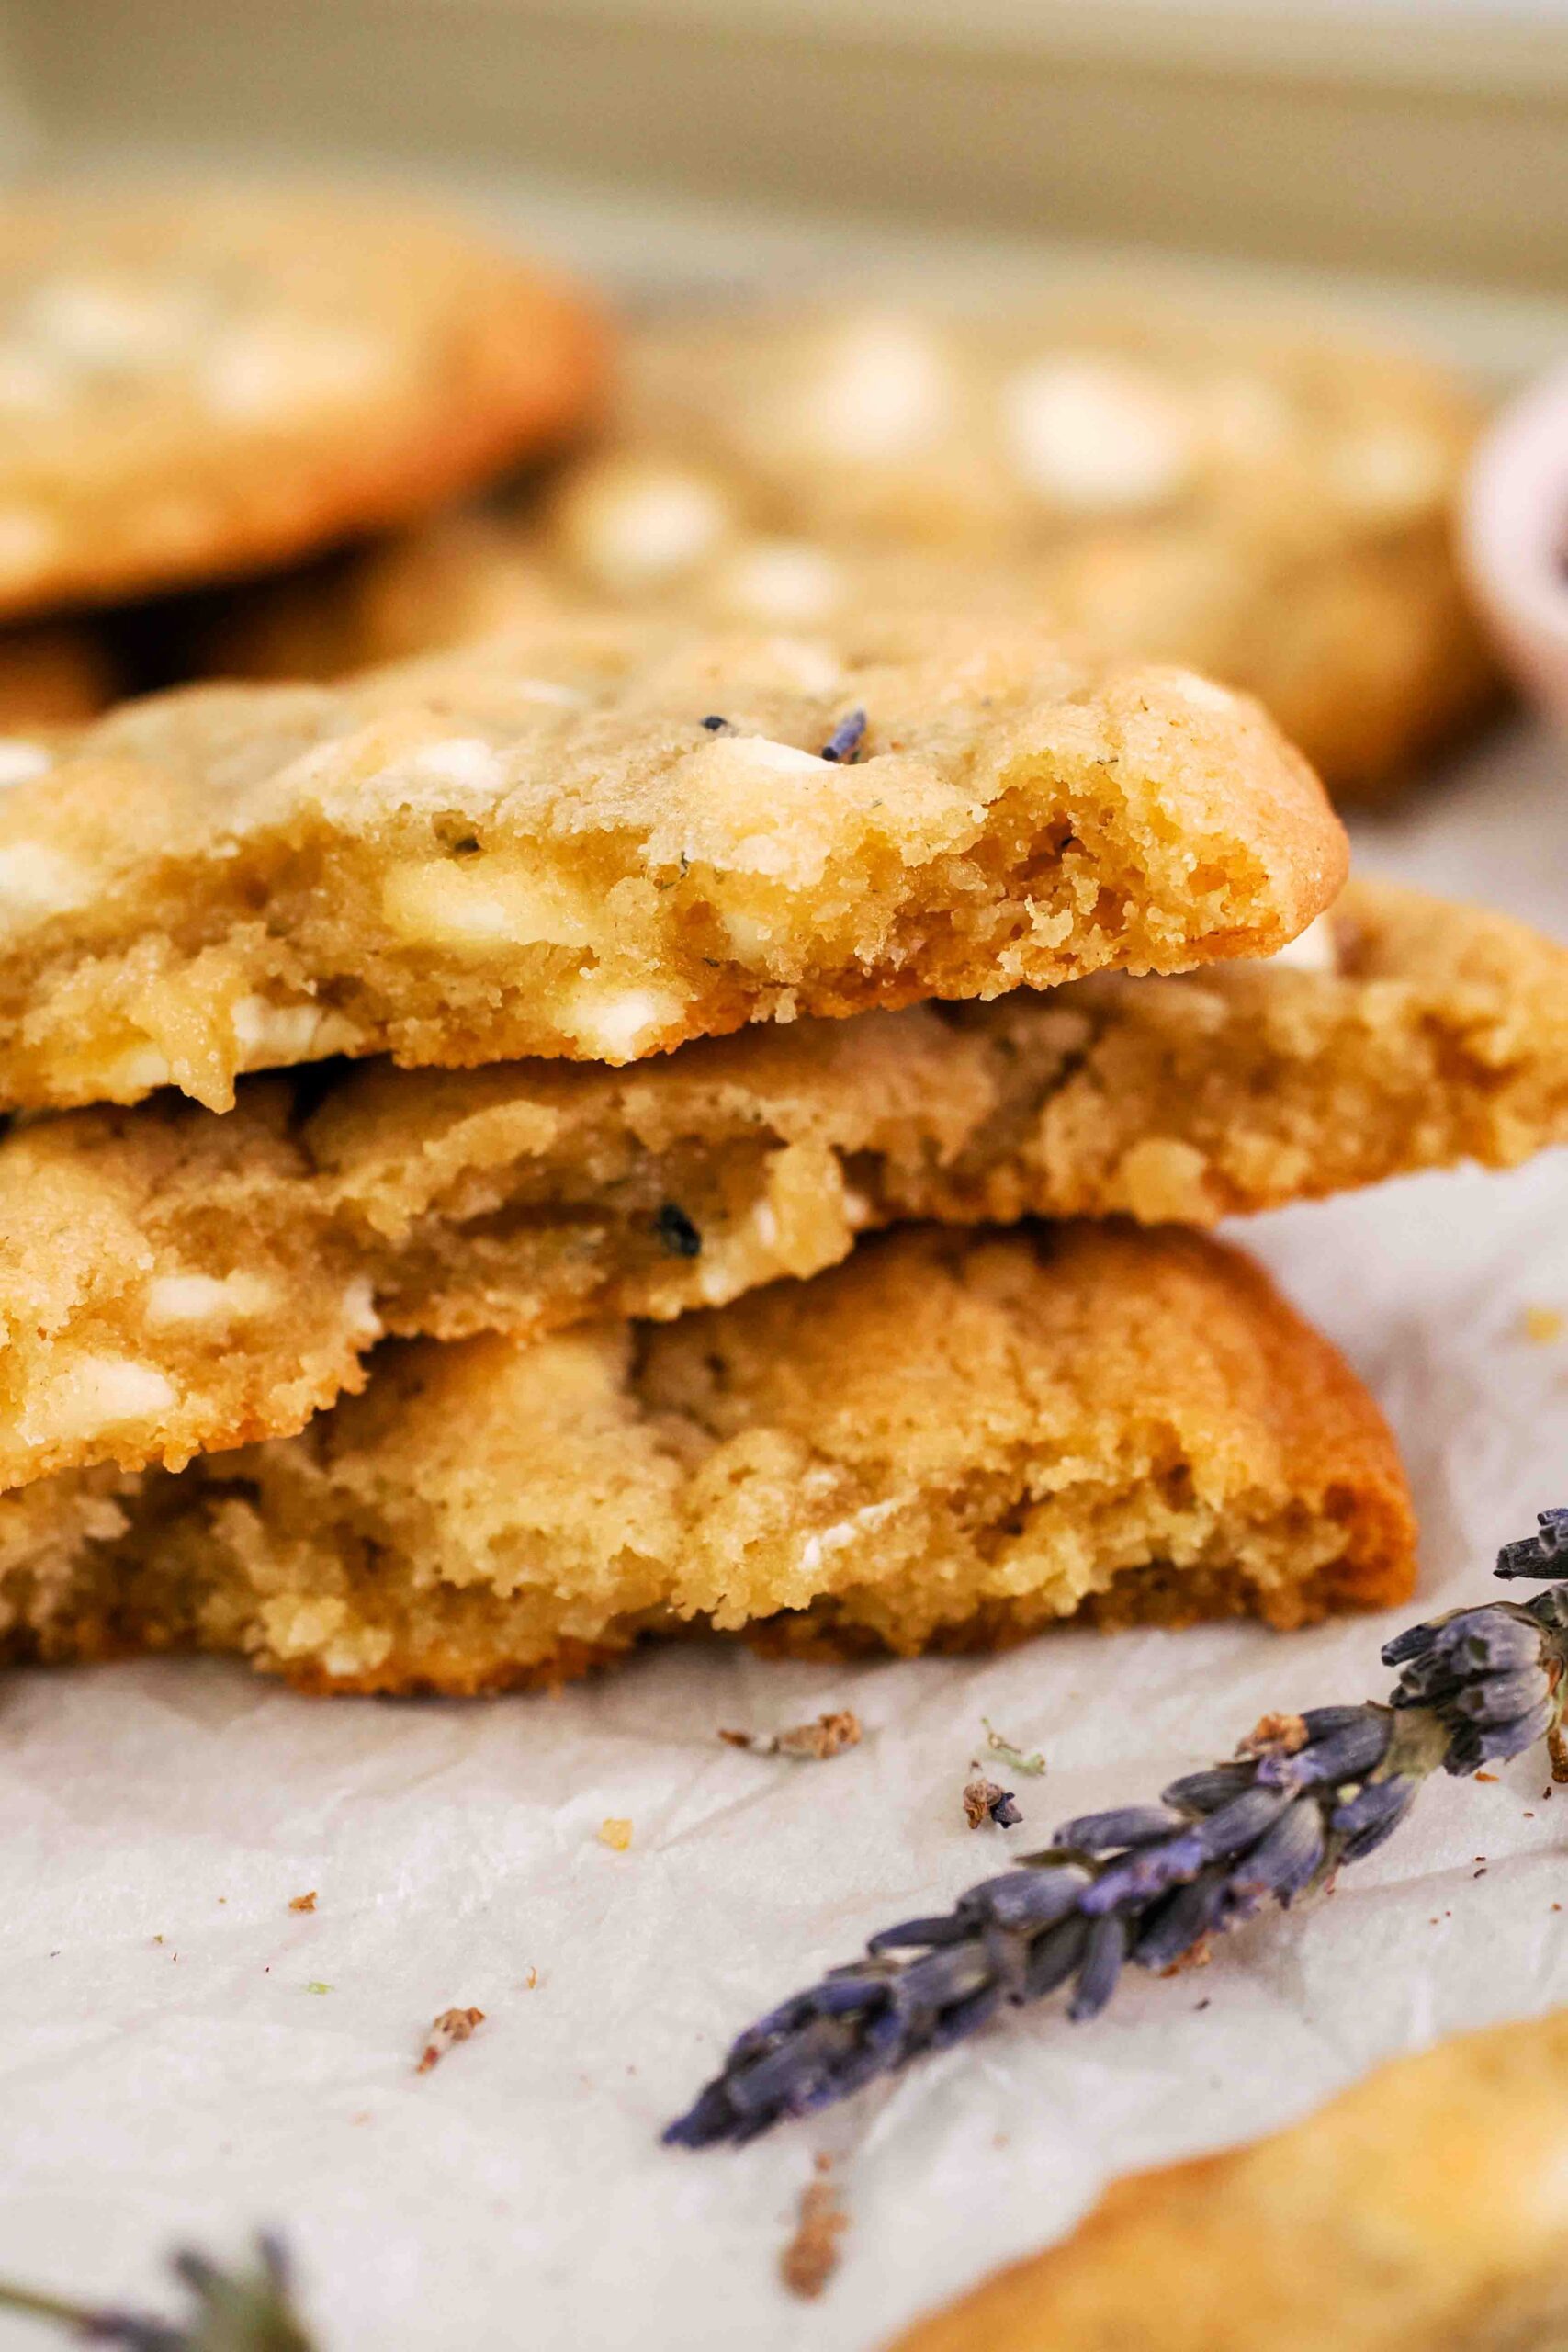 Lavender white chocolate chip cookies broken in half and stacked on parchment paper.